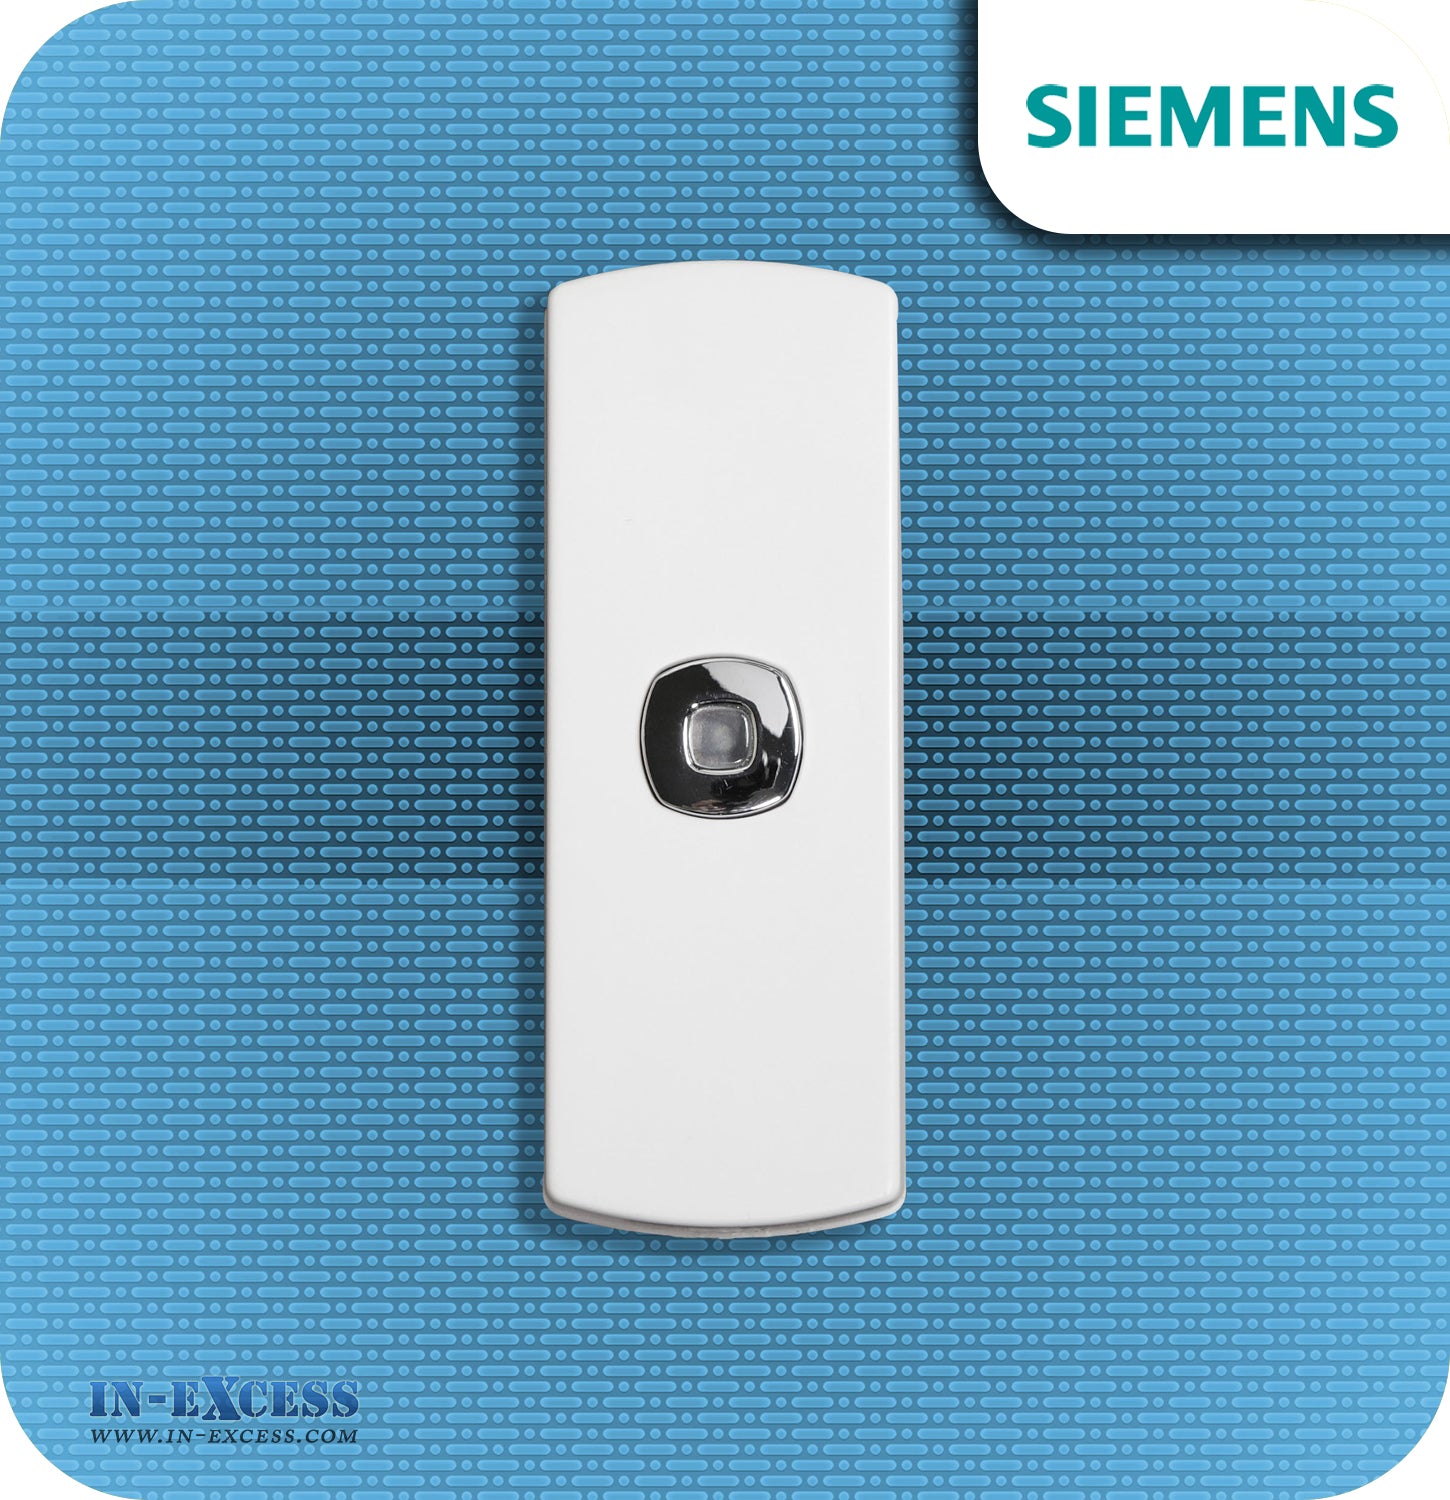 Siemens Azure Wirefree Portable Door Bell Chime Kit JSJS-216 - With JSJS-104W Bell Push